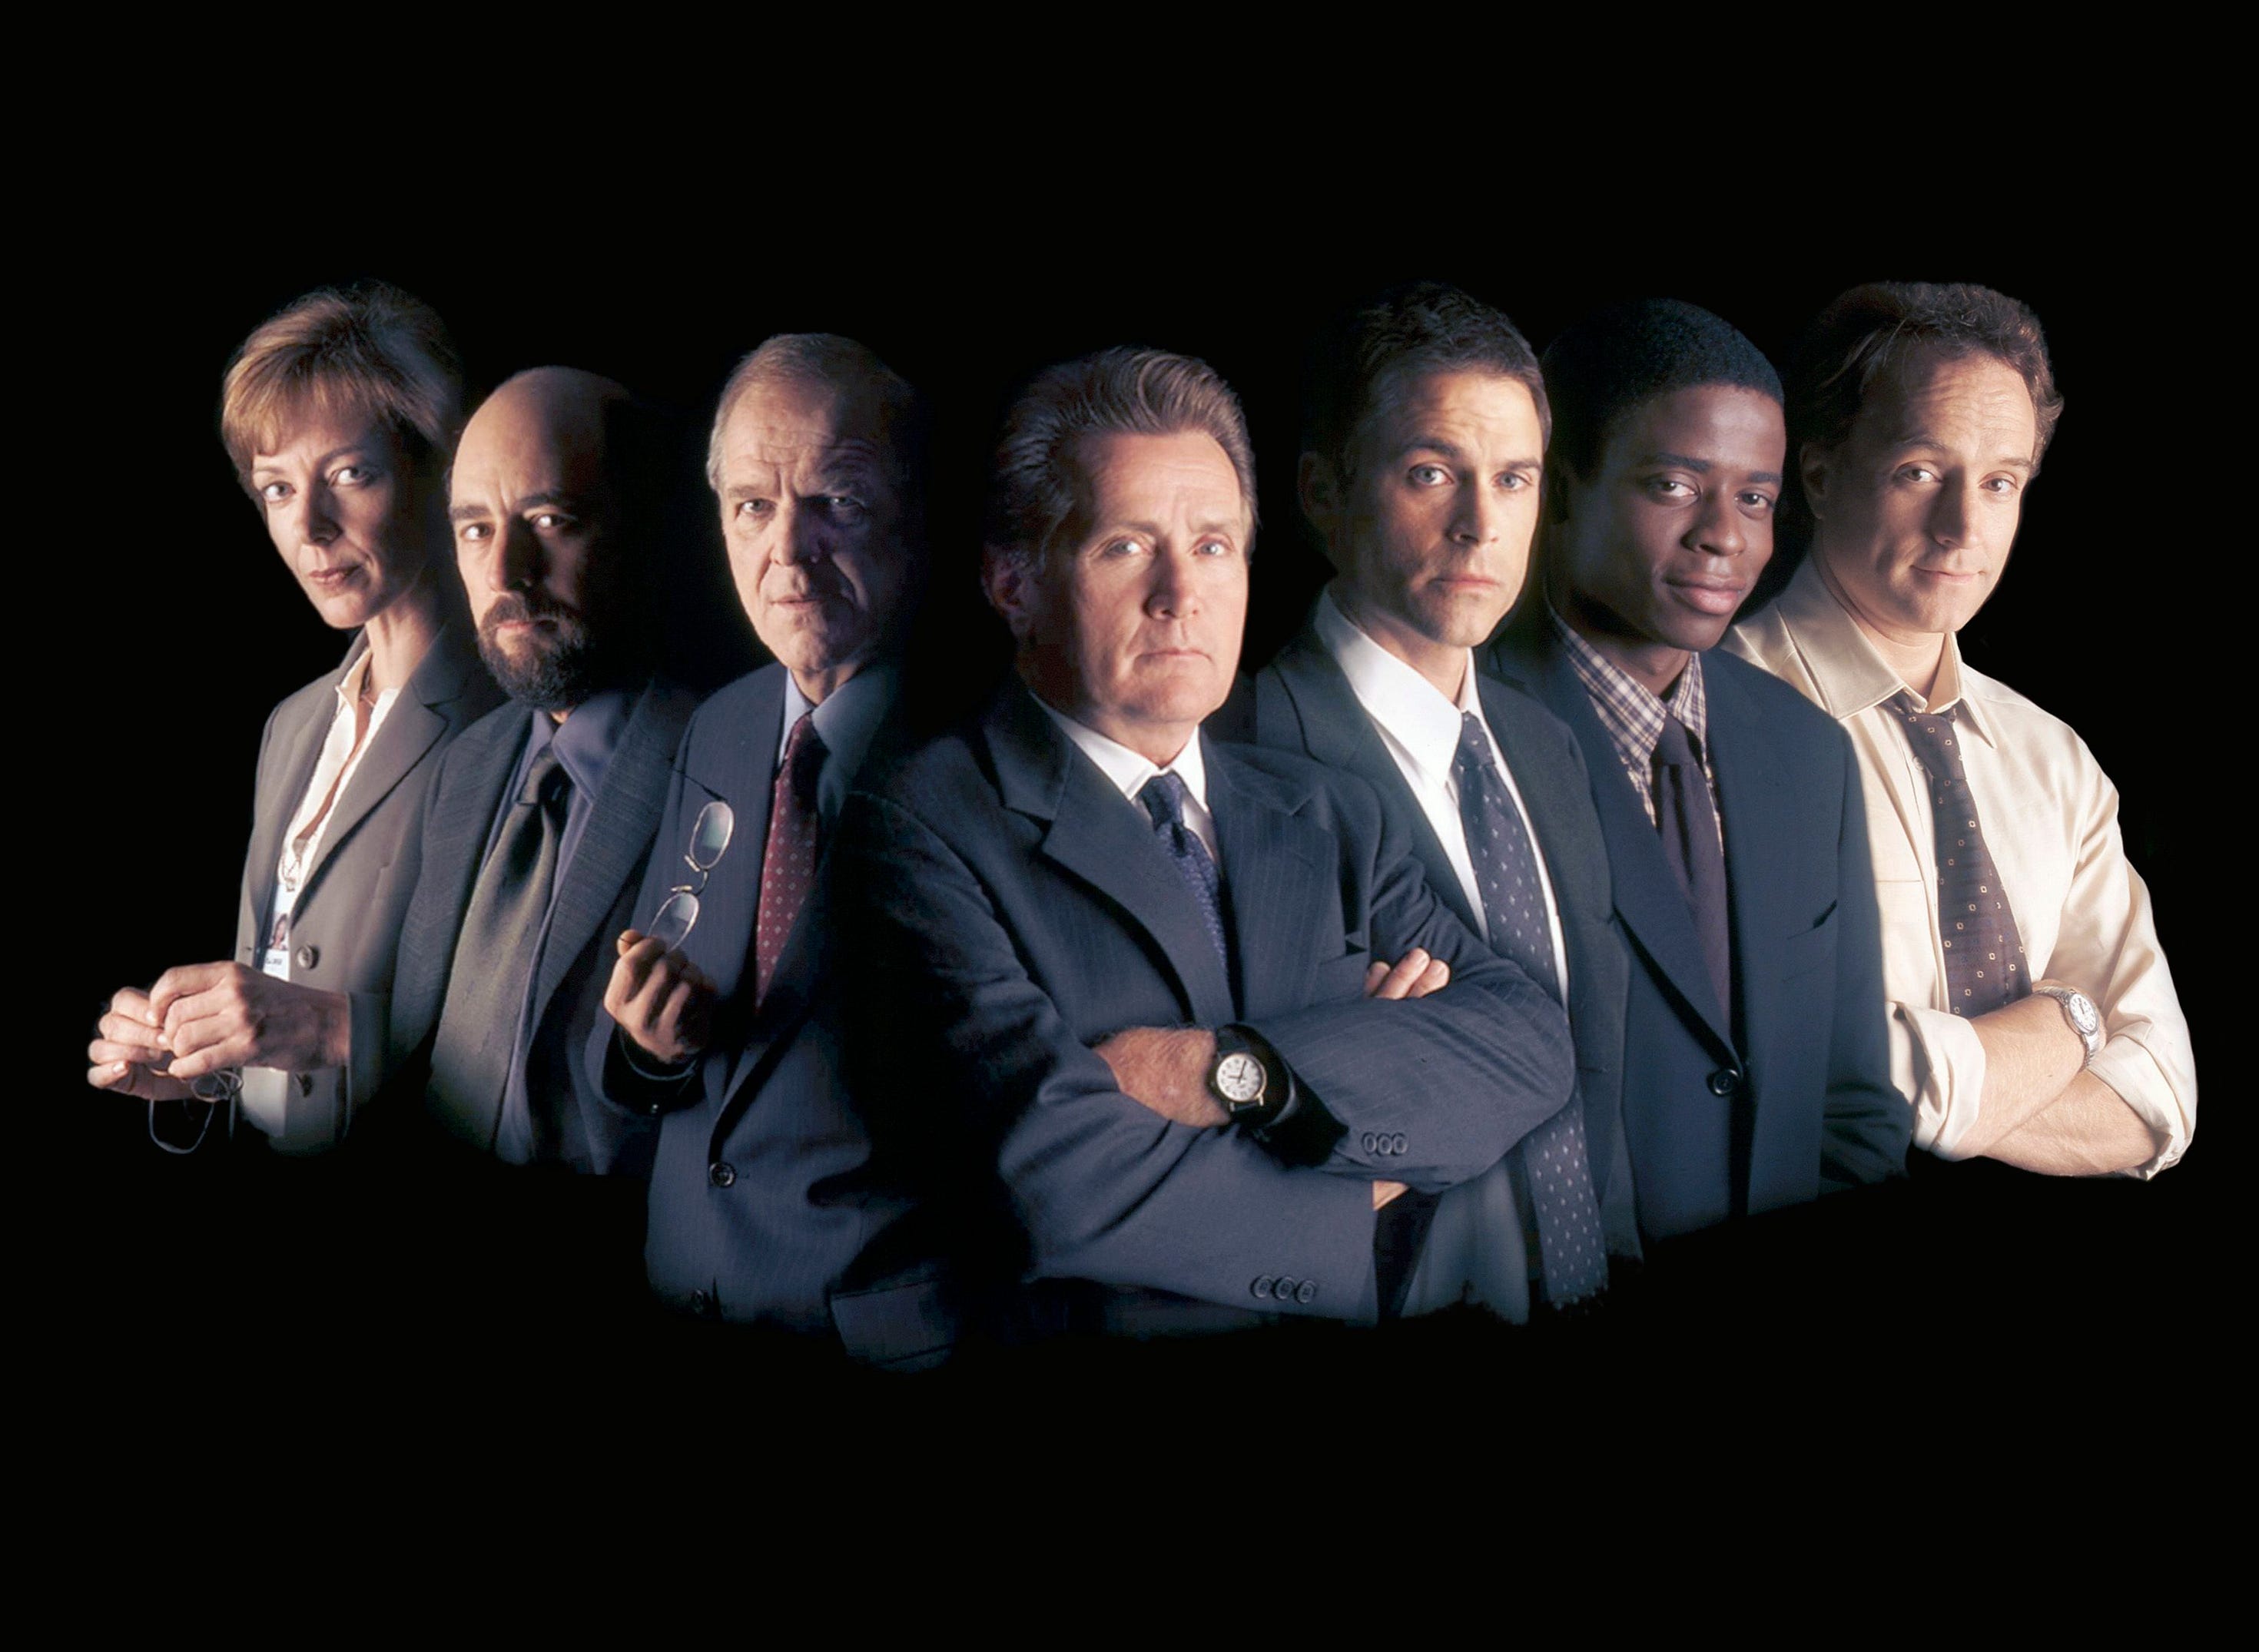 The West Wing': The Best and Worst Episodes | by Lucien WD | Luwd Media |  Medium